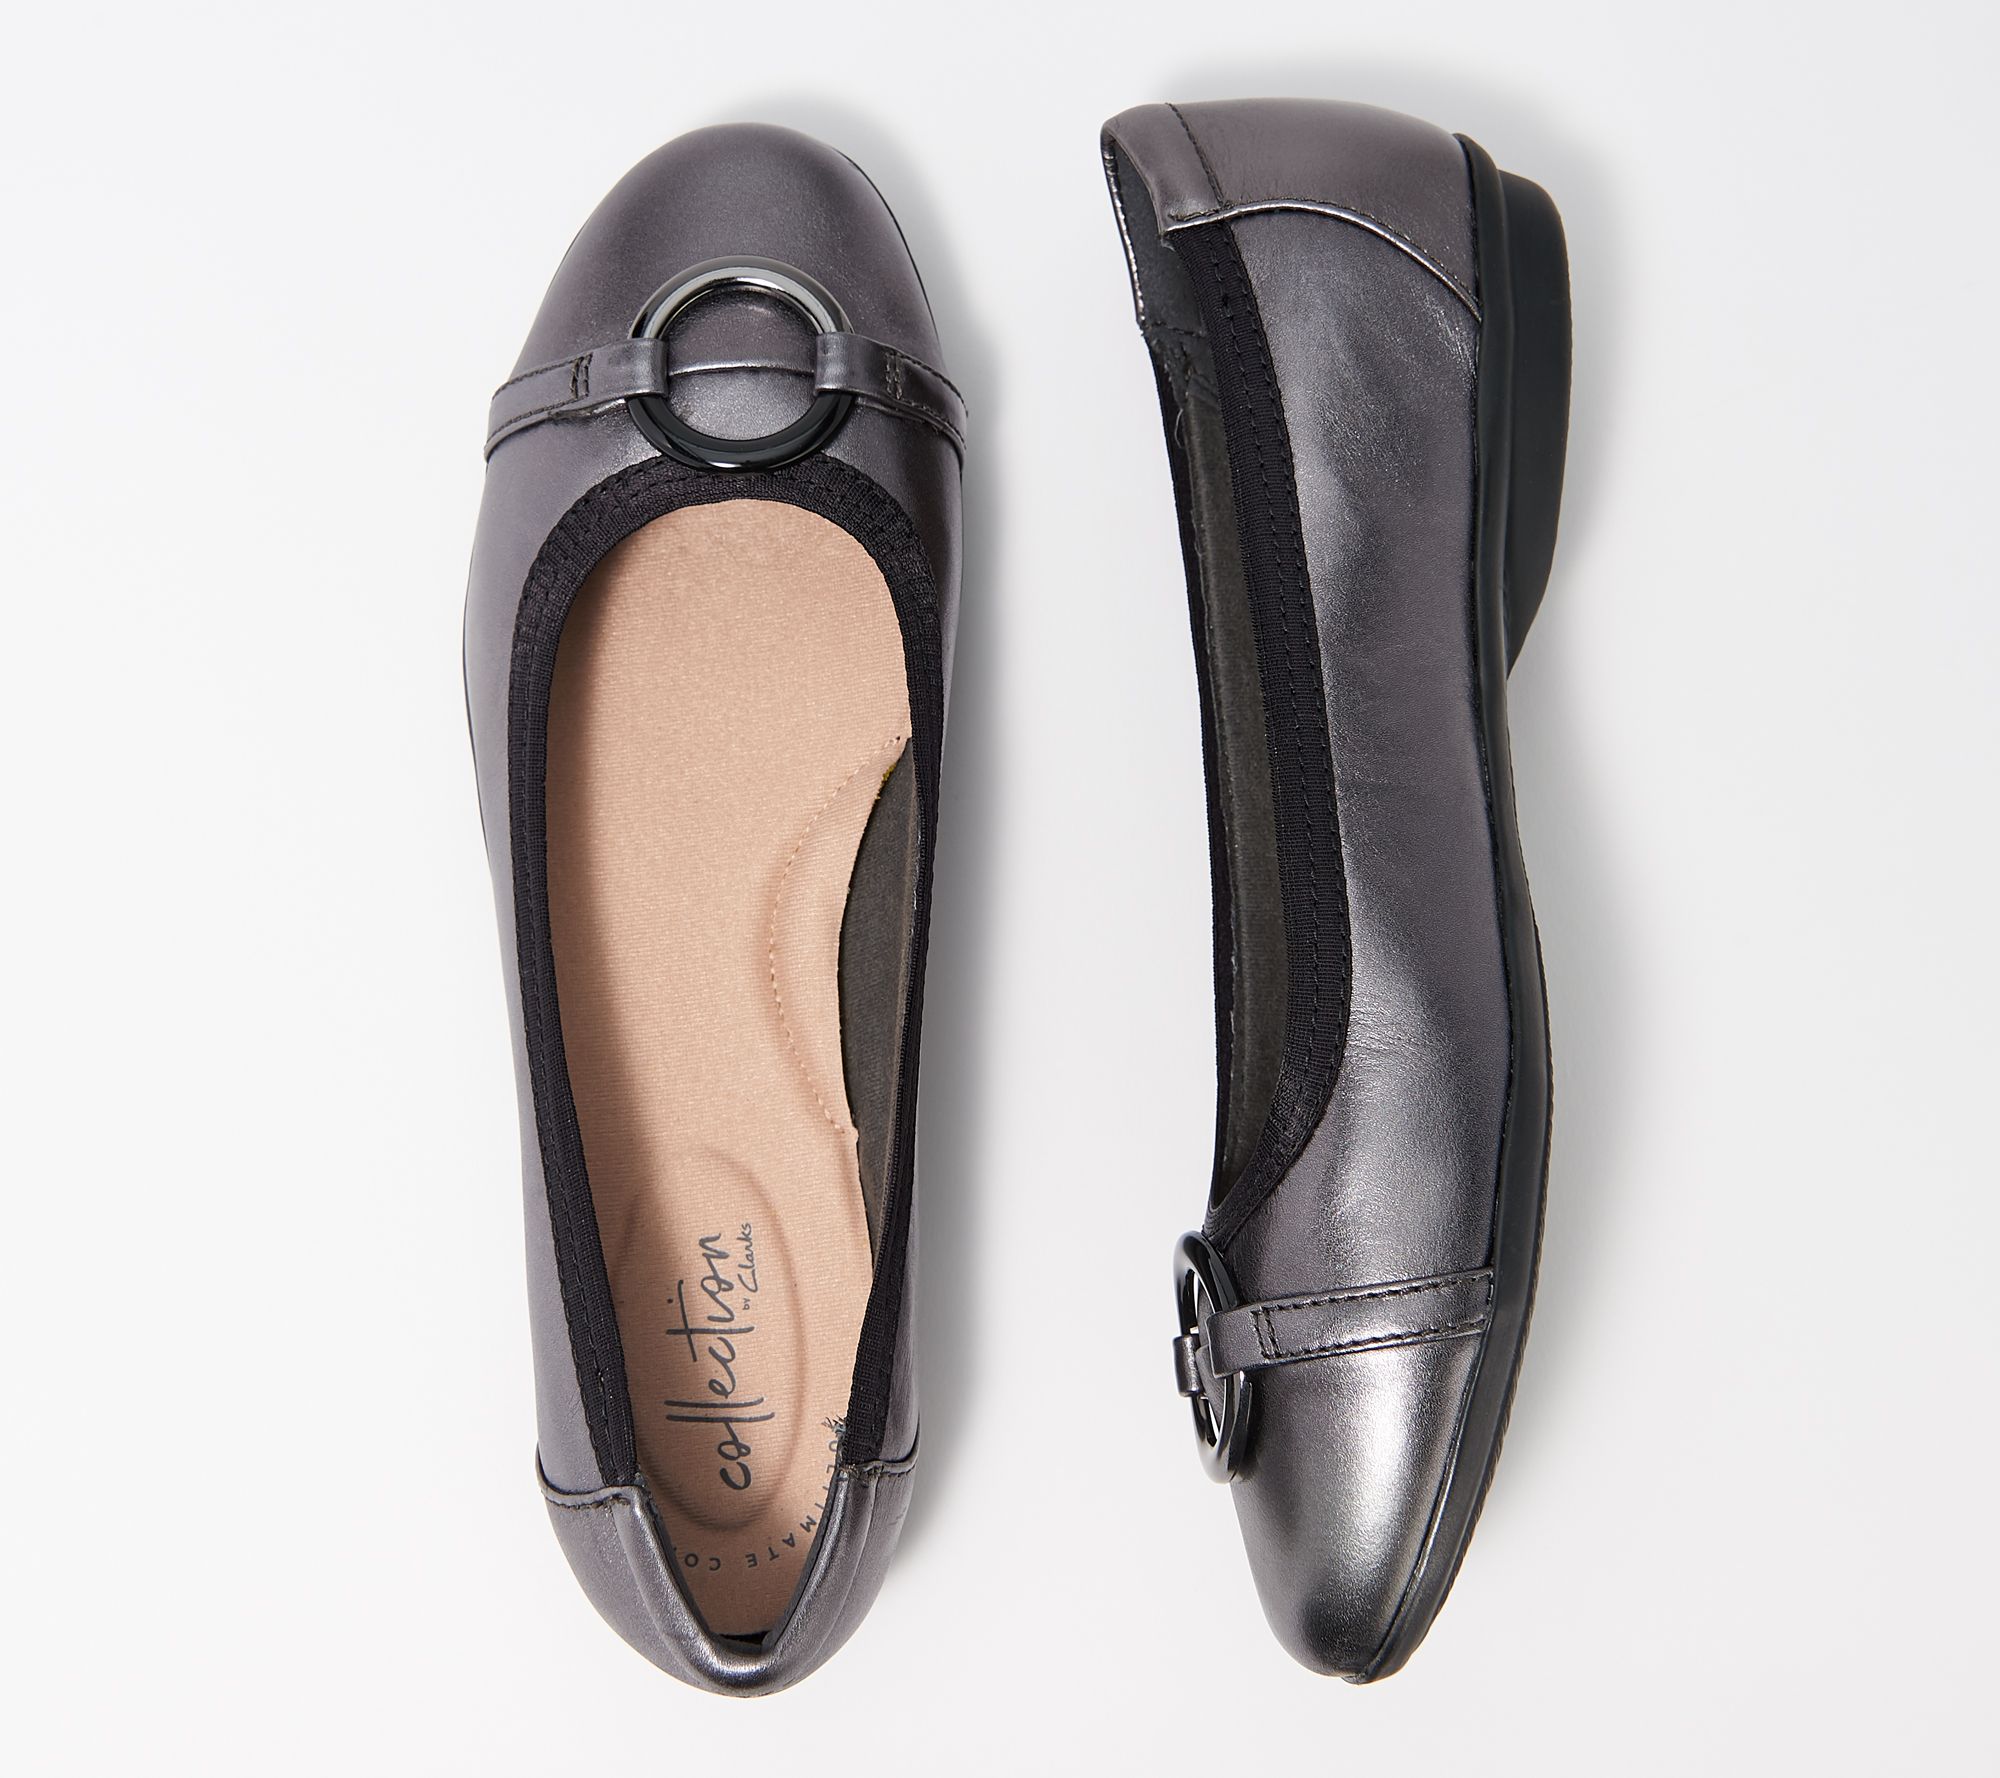 clarks leather flats